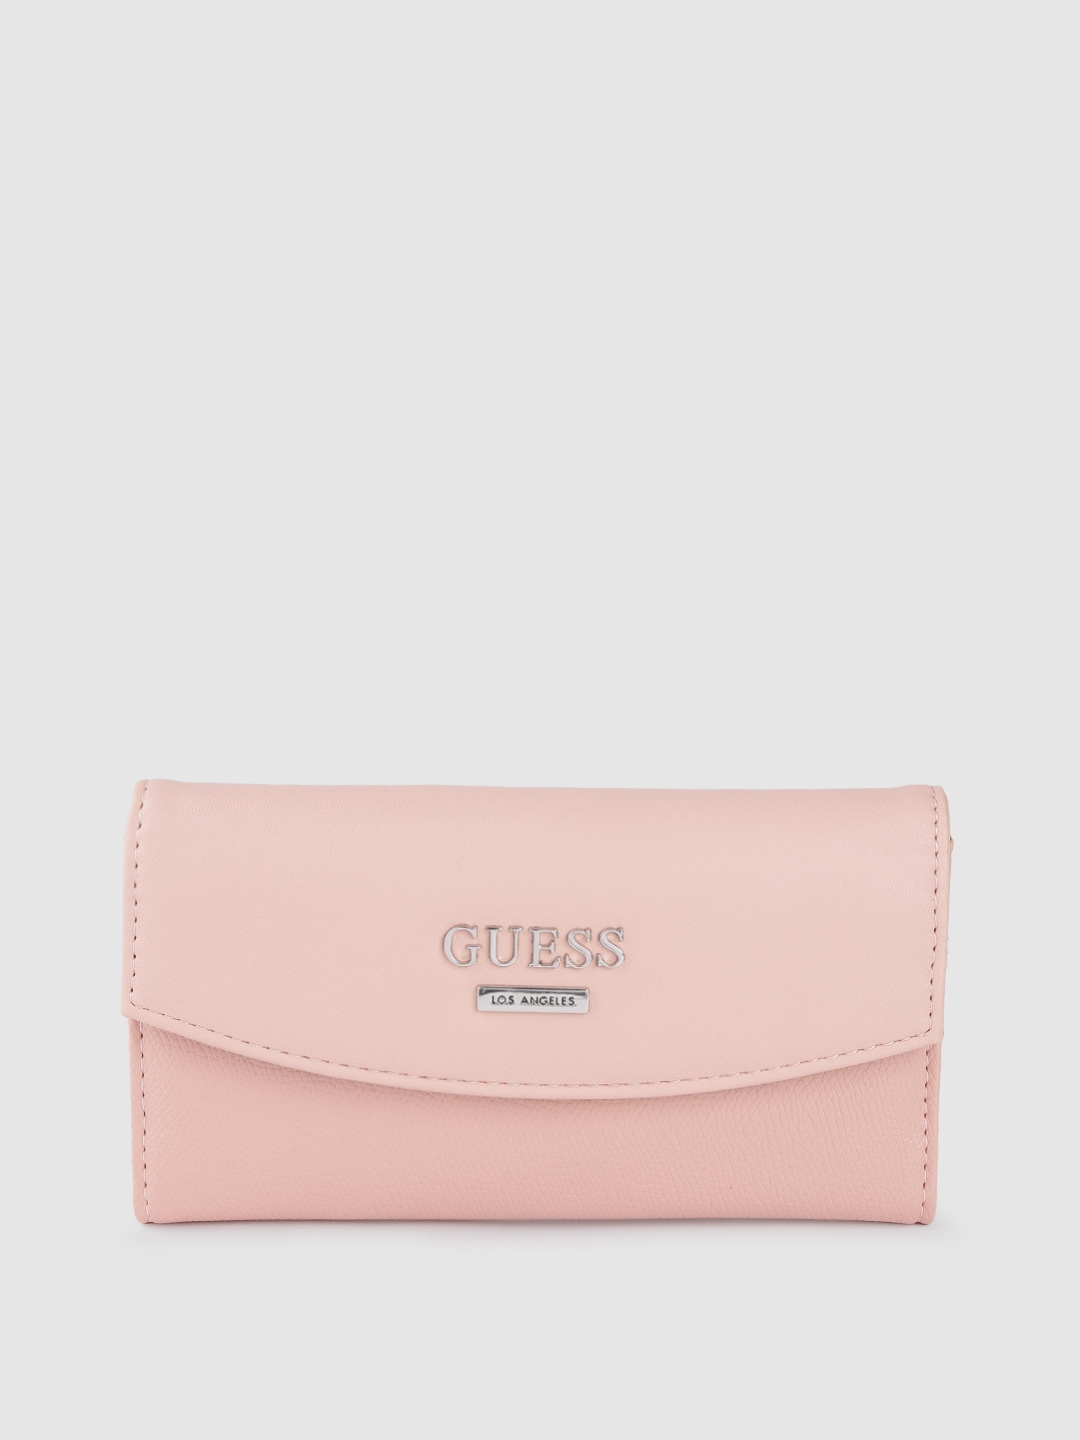 GUESS Women Peach-Coloured Solid Three Fold Wallet Price in India